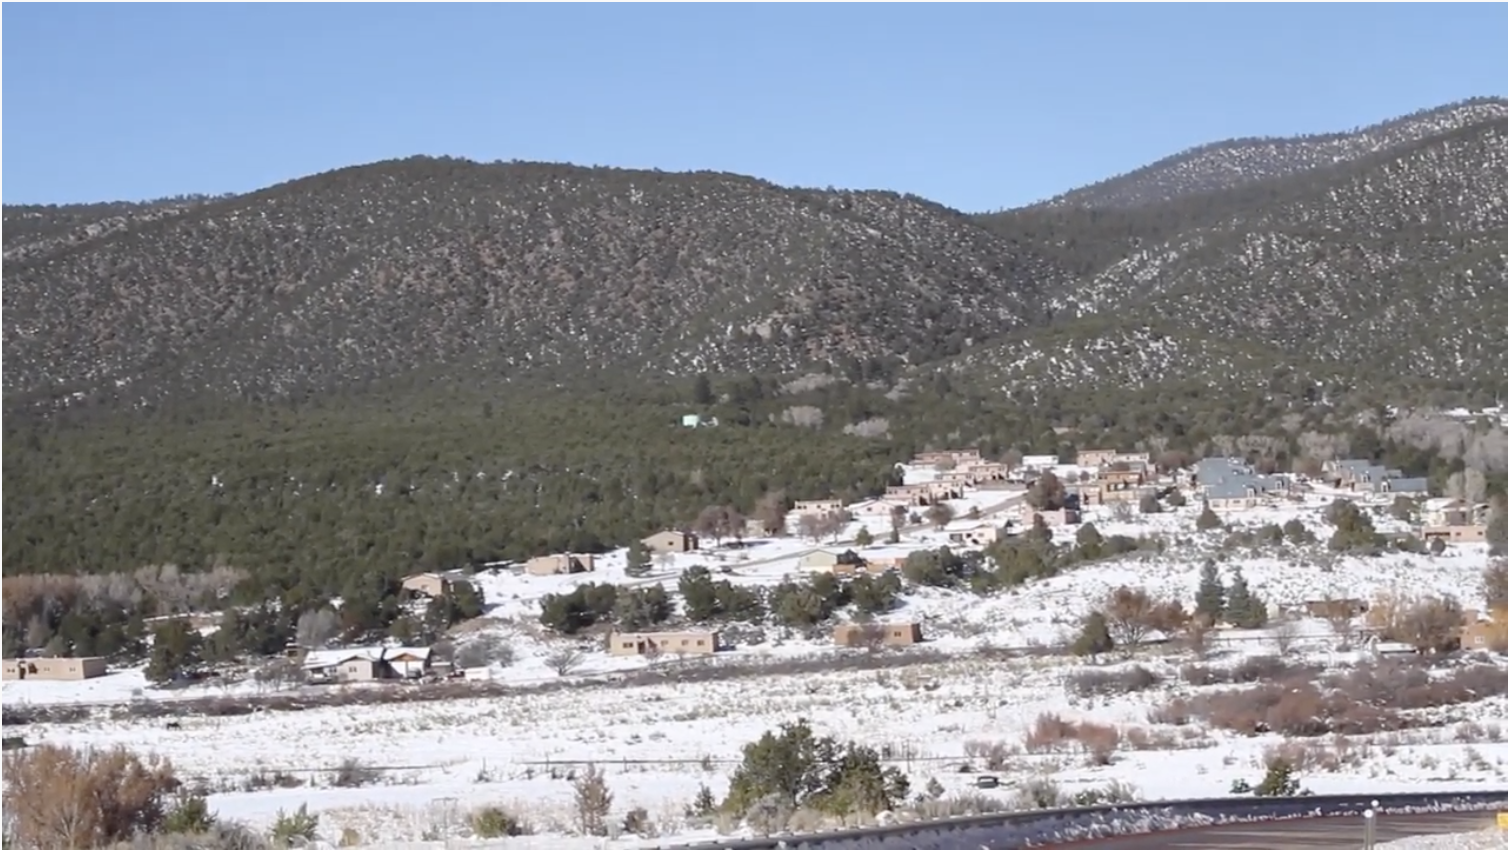 landscape photo of arid terrain. pueblo tyle homes in the foreground, mountains in the background.